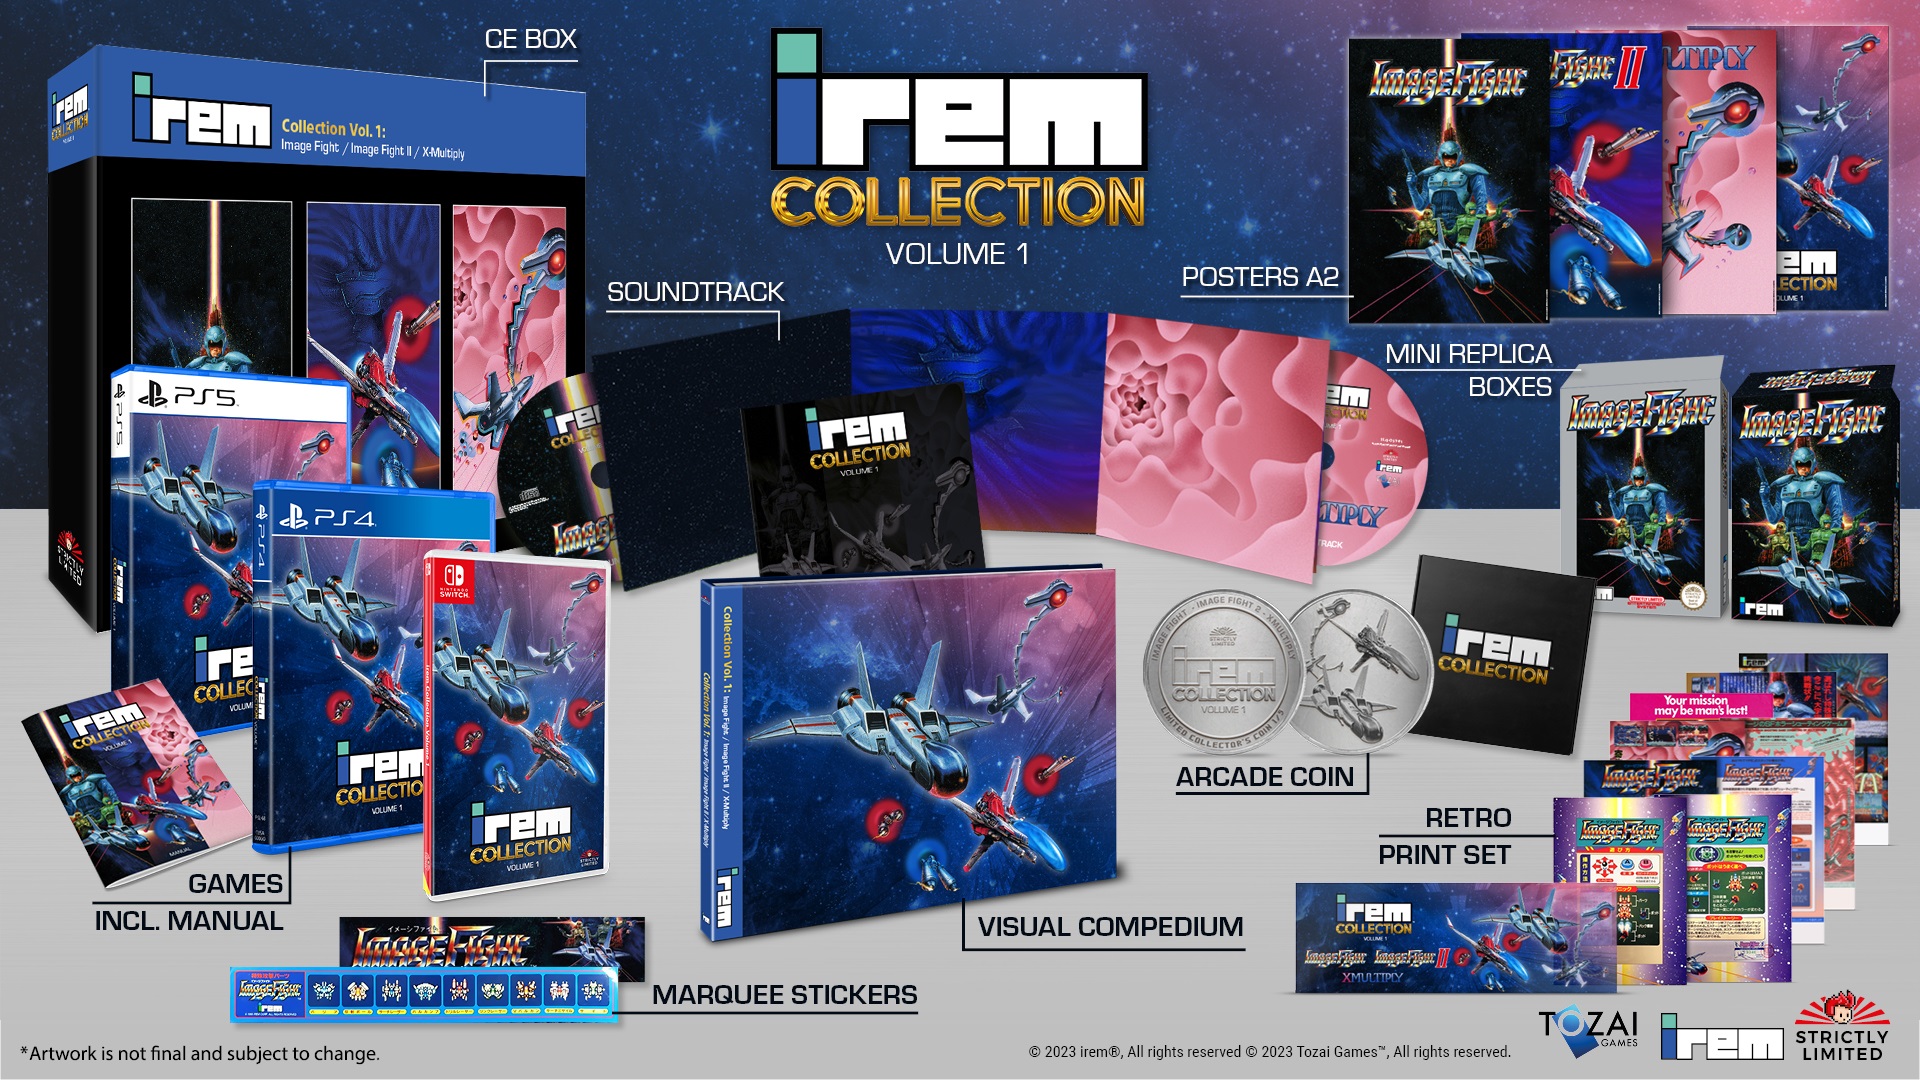 IREM Collection Volume 1